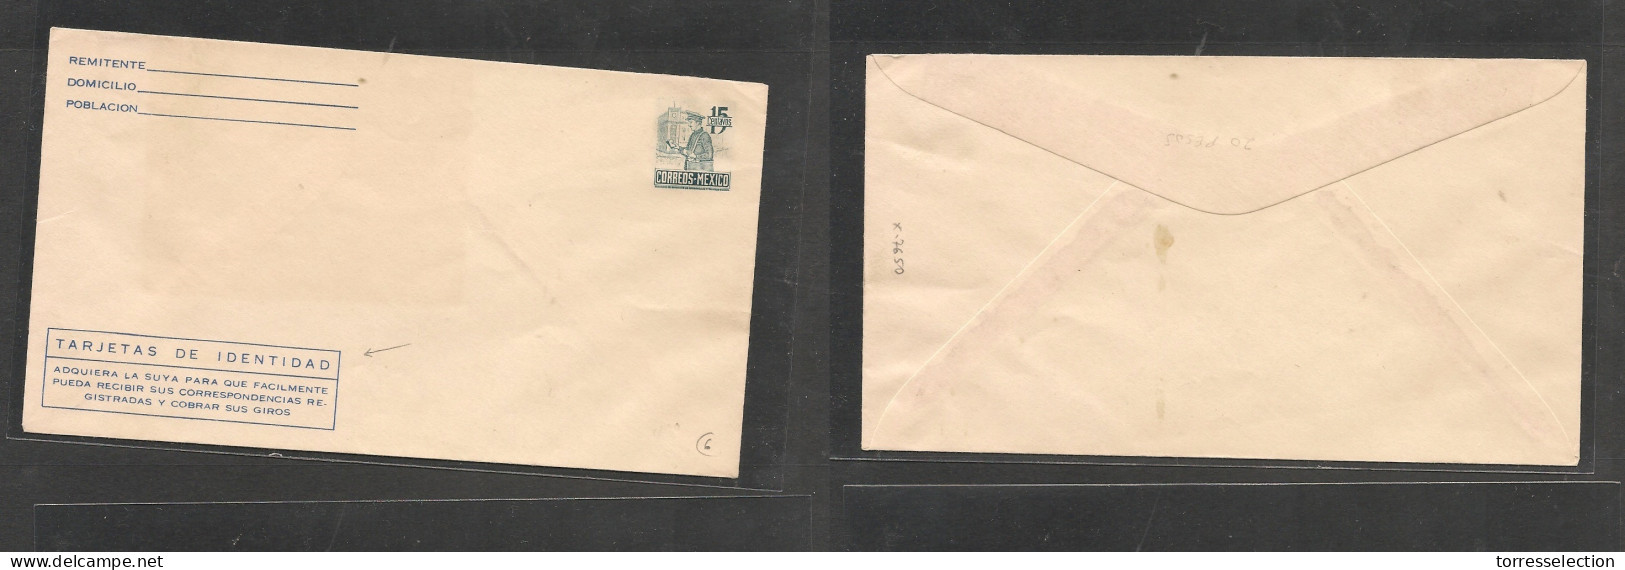 MEXICO. Mexico Cover - C,1940s Stat Env 15c Postman With Identidad Adv Cachet Rinted, Mint, Fine XSALE. - México